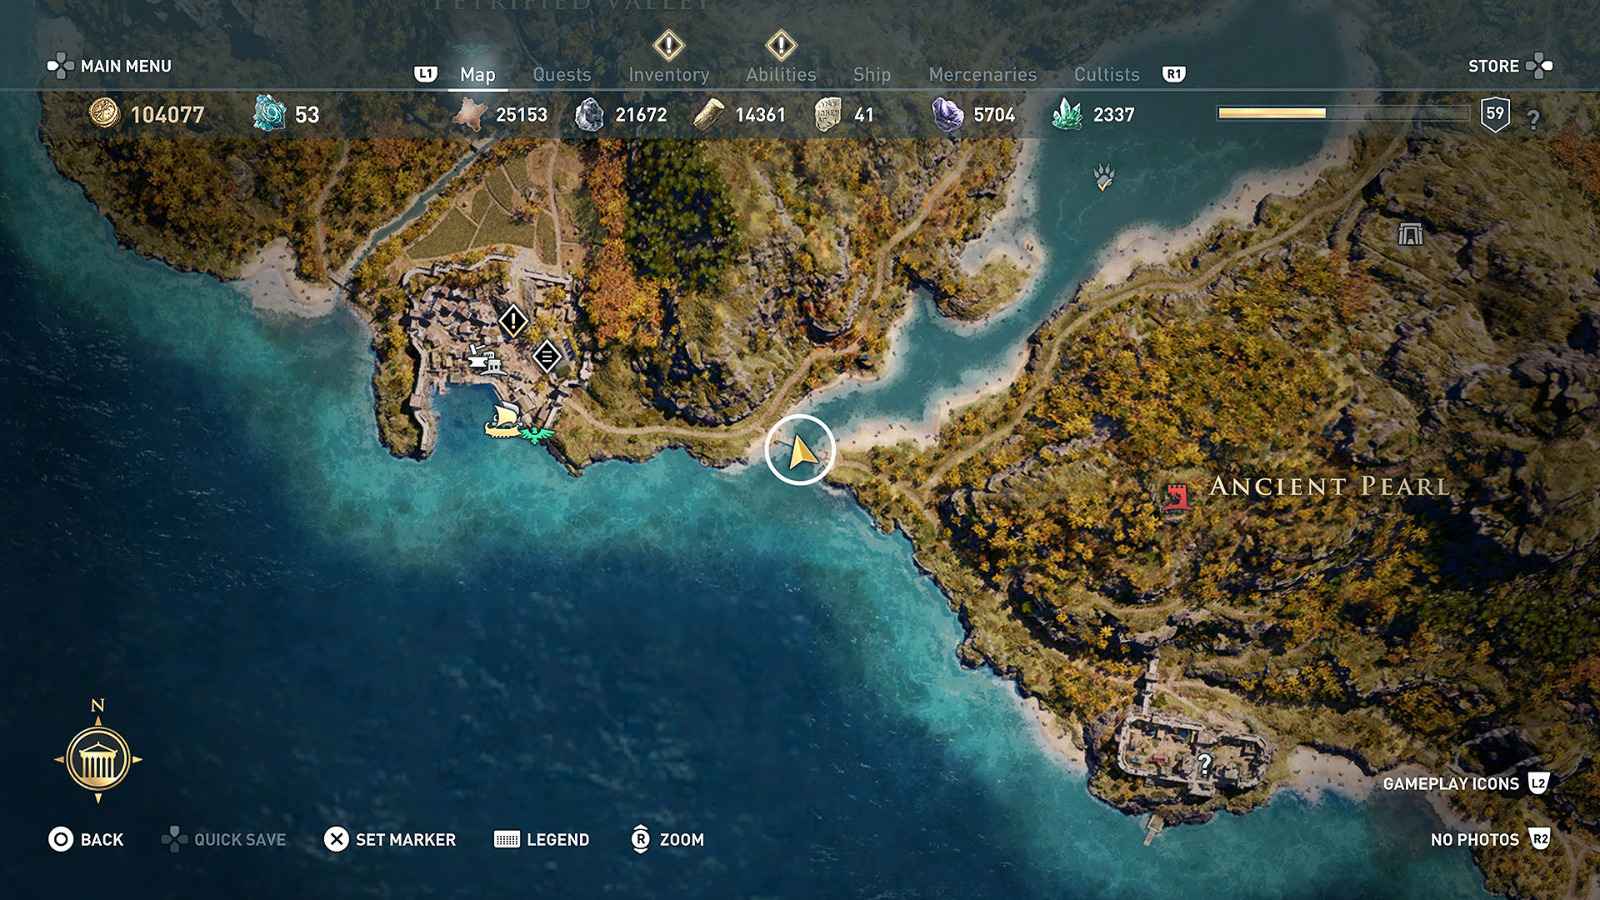 Gallery of Ac Odyssey Guide.